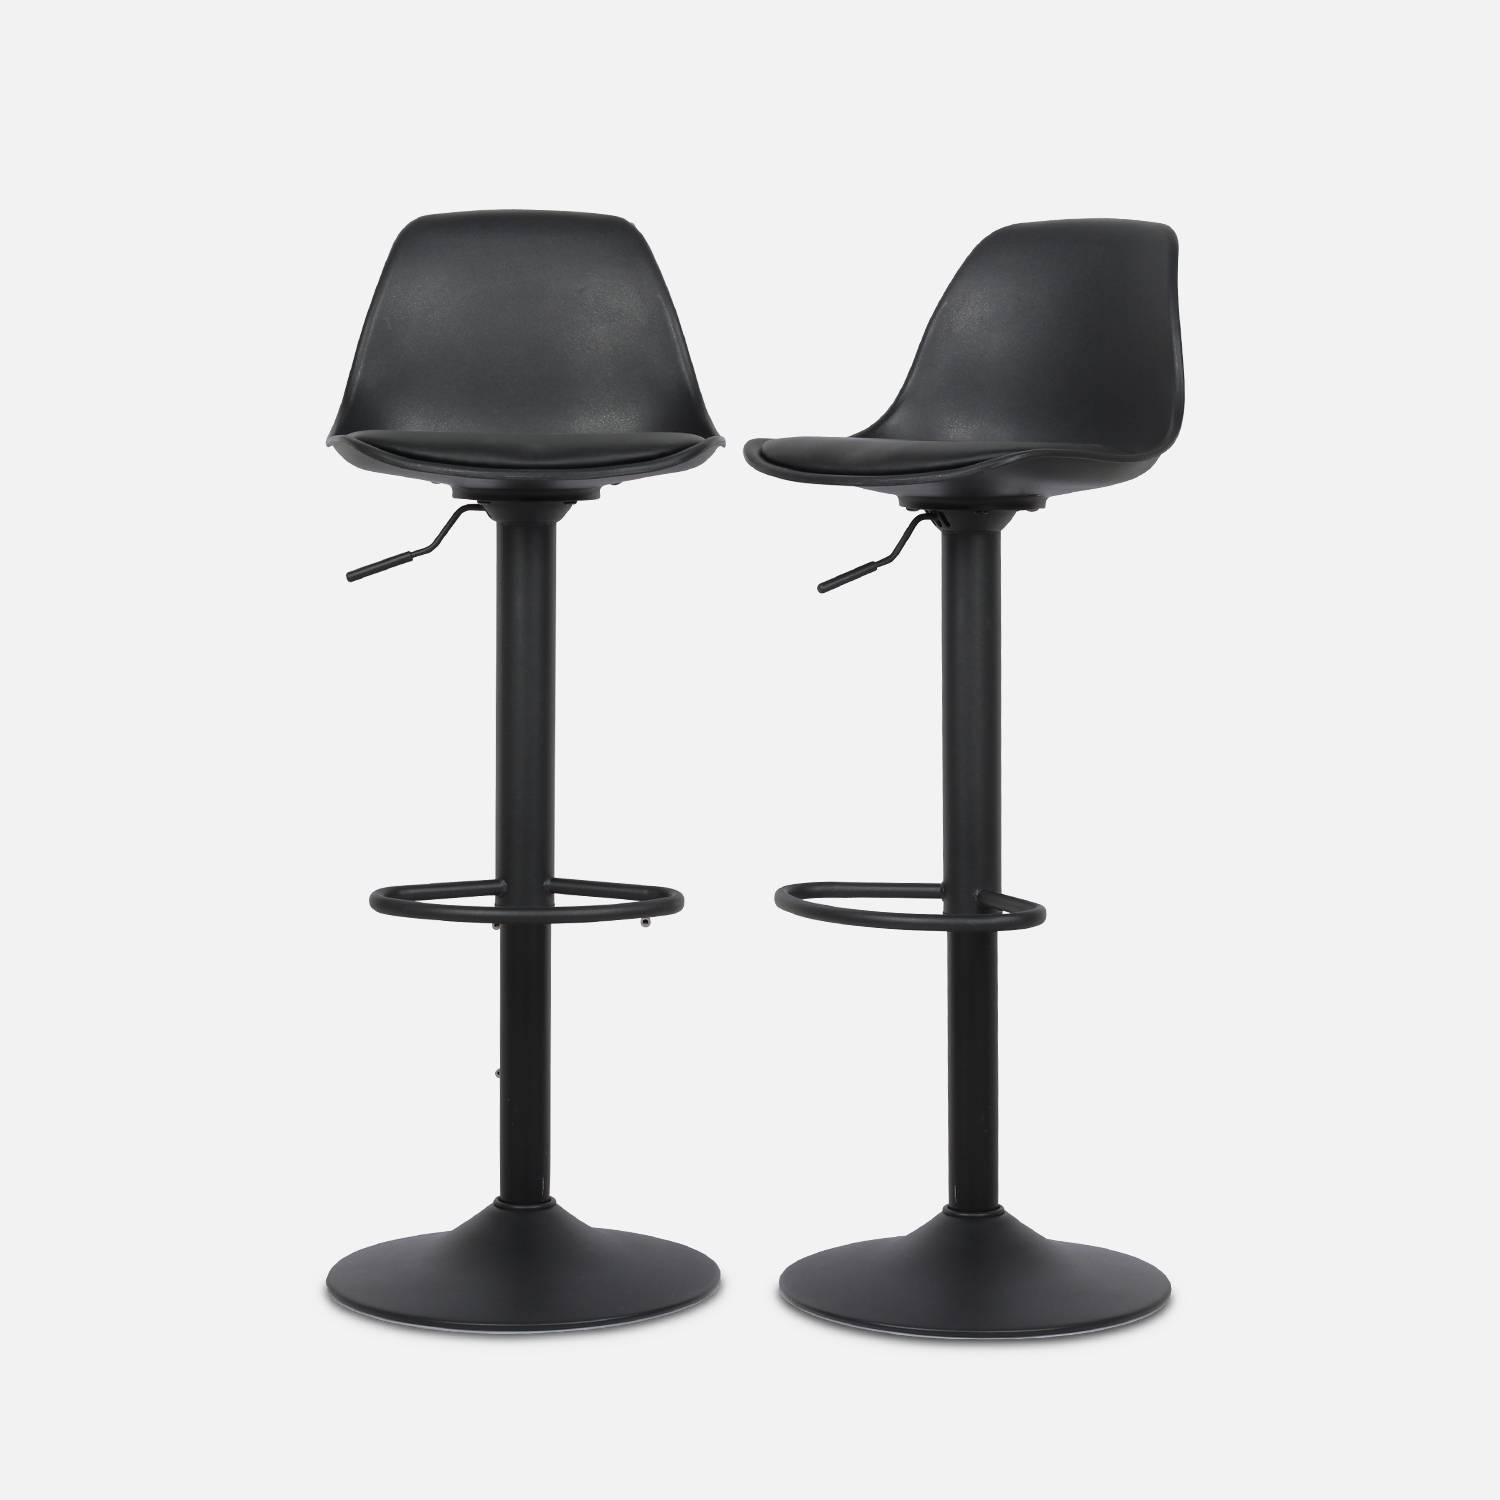 Pair of faux leather, rounded backrest, adjustable bar stools, Black | sweeek